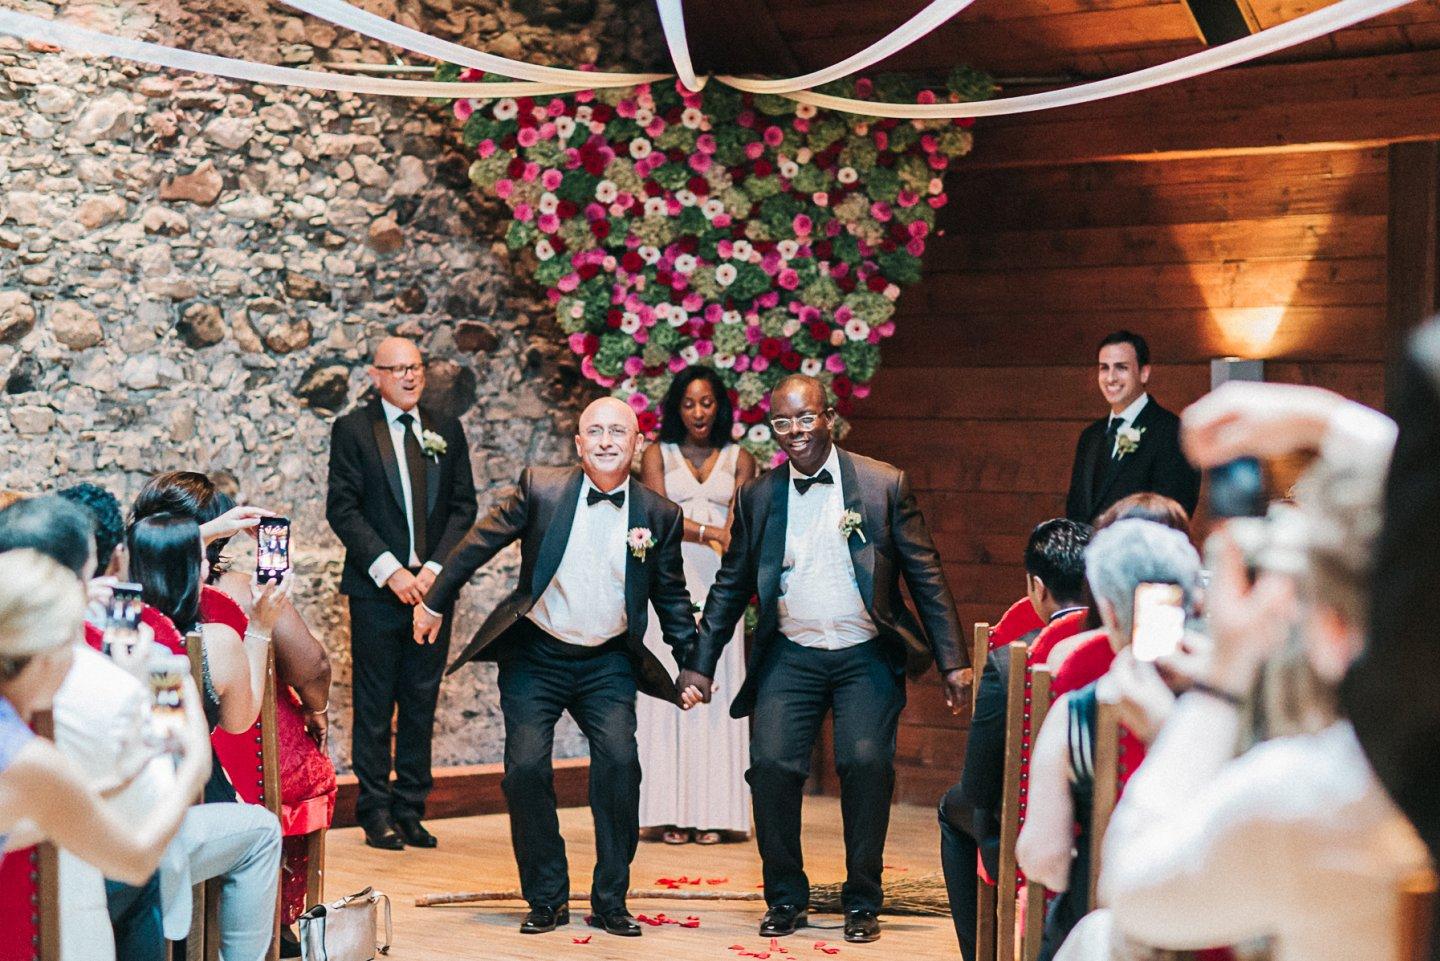 Jumping the broom! A black tradition passed along from when it was illegal for slaves to marry. Flower triangle a nod to gays persecuted in the Holacaust.